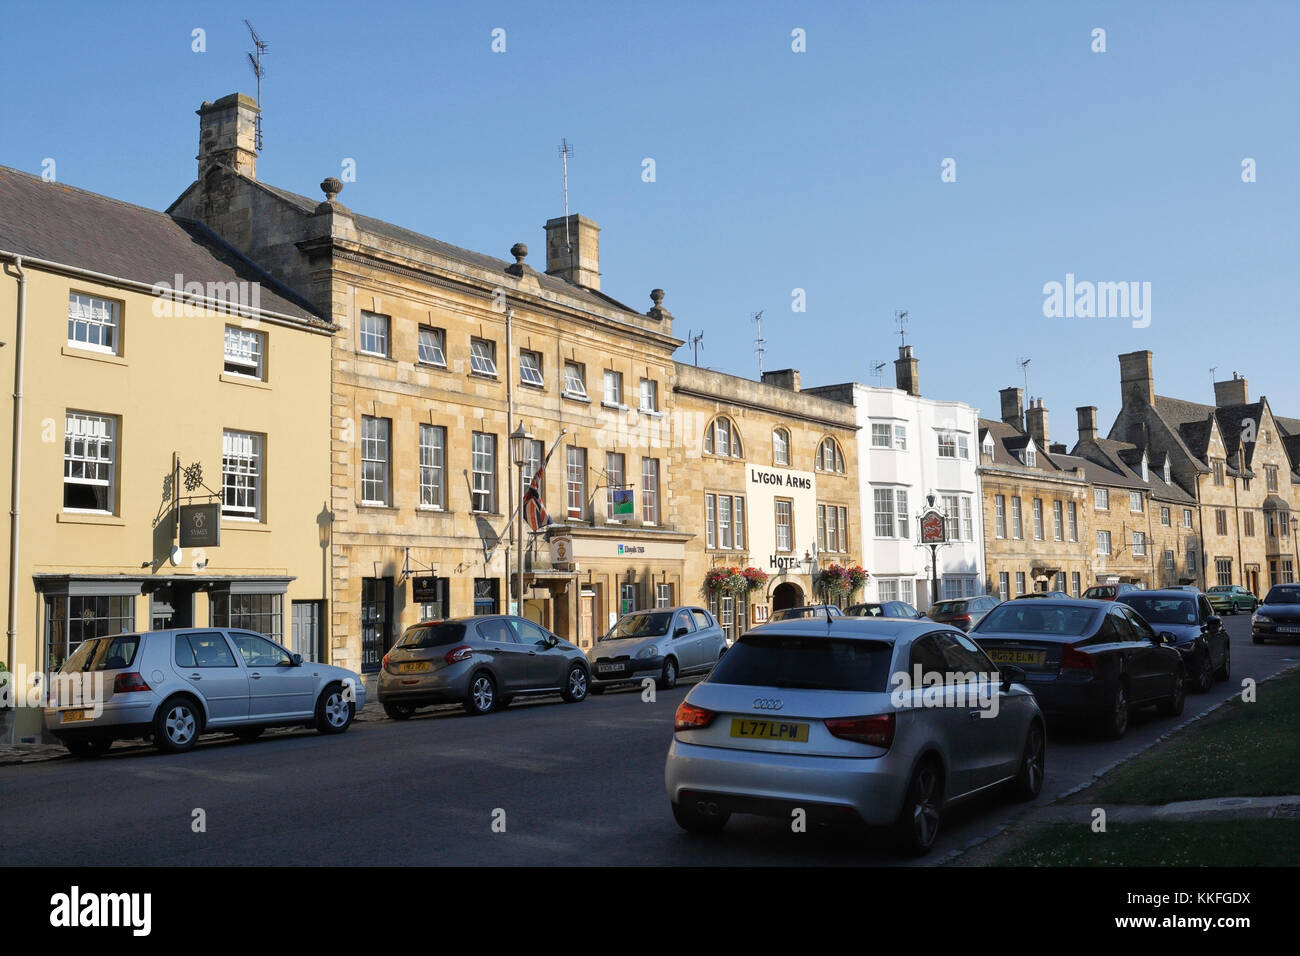 Lloyds TSB Bank and the Lygon Arms Hotel Chipping Campden High Street England, English cotswolds town rural England period houses Stock Photo